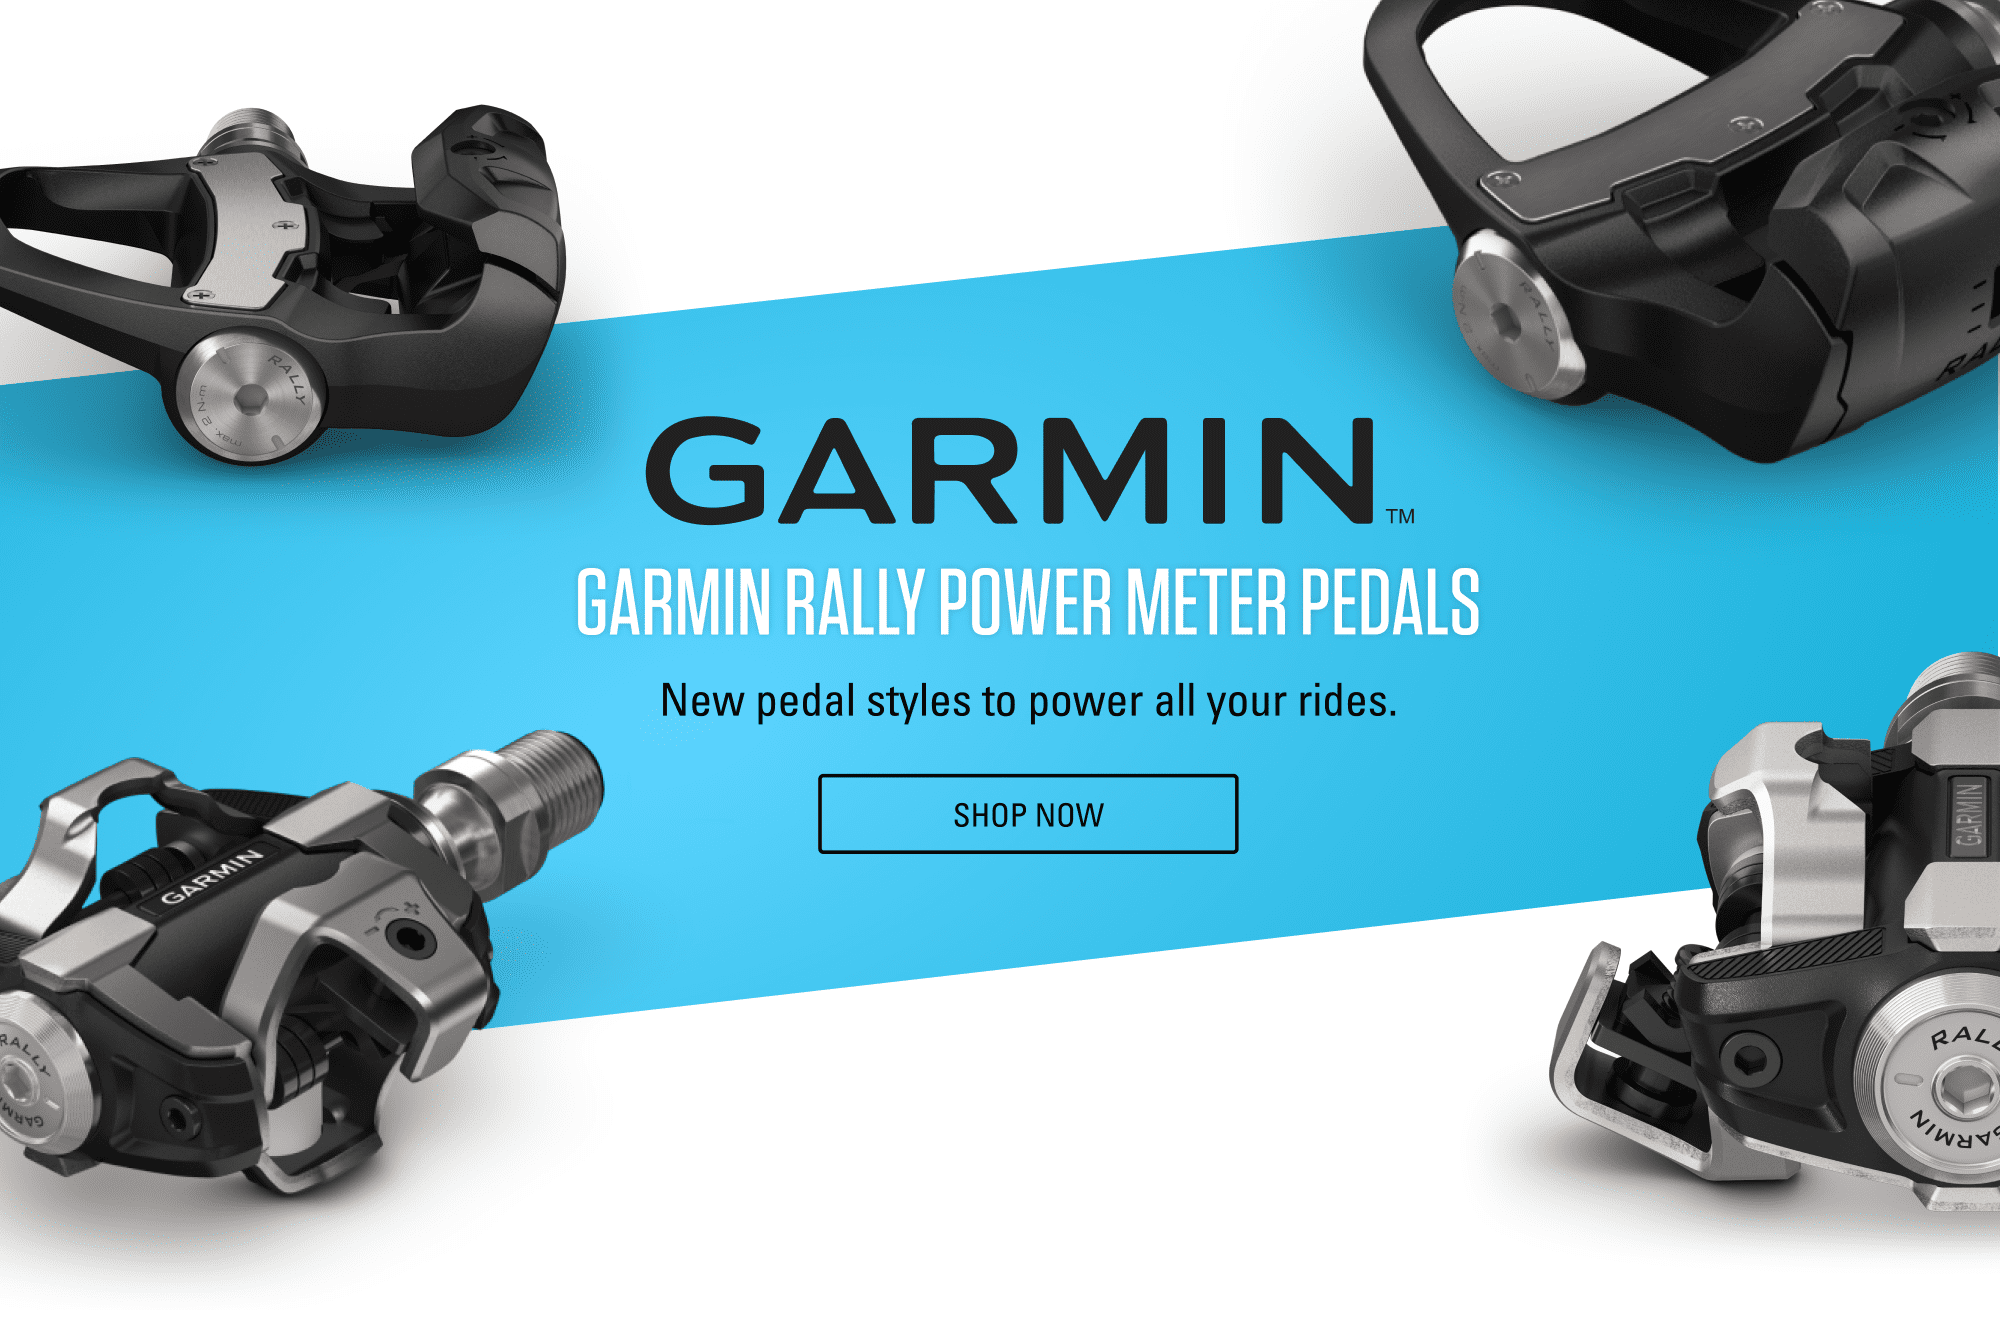 Garmin Support, Rally™ Pedals